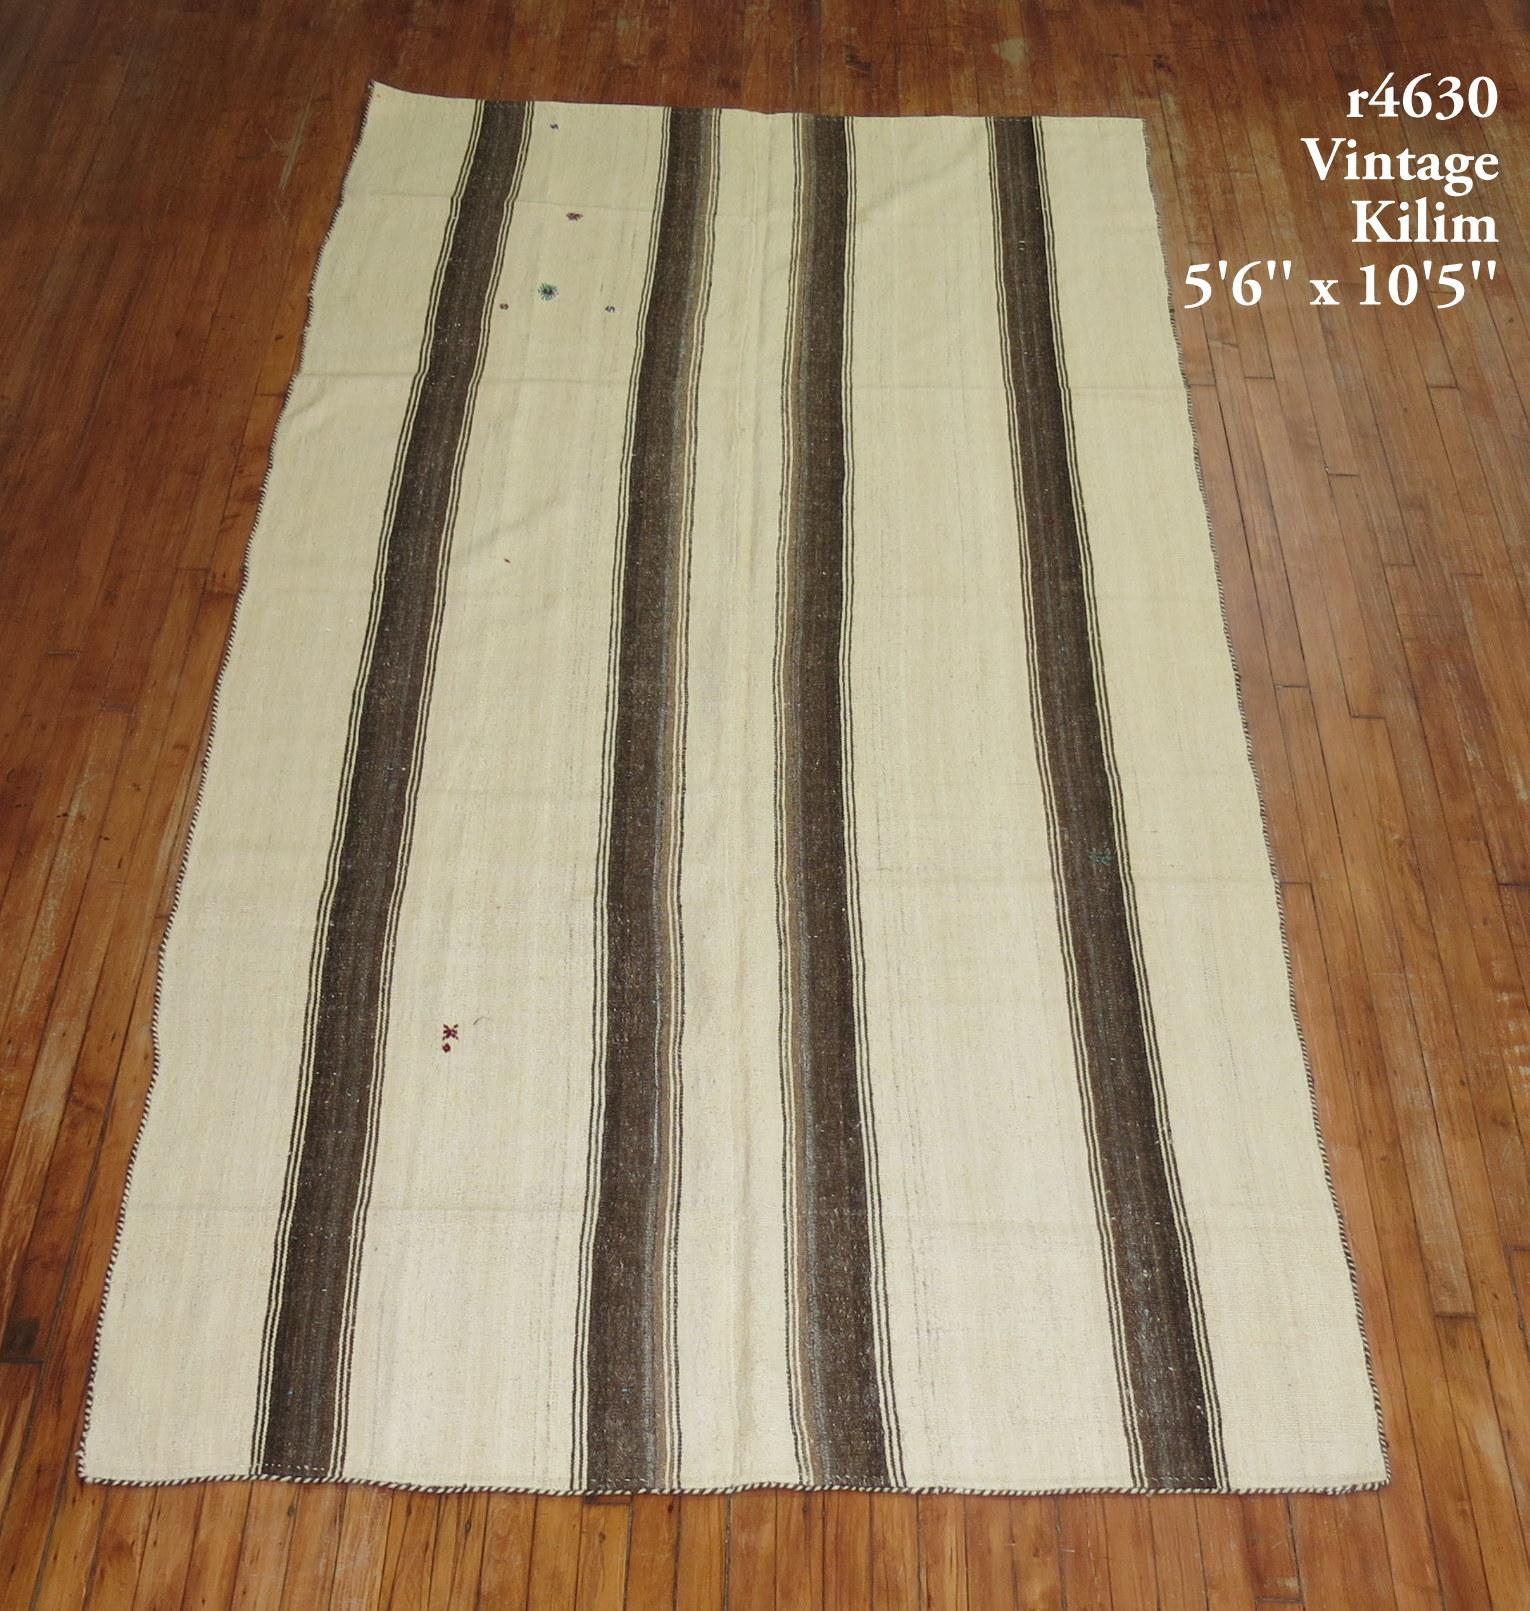 A vintage Turkish kilim with a striped motif in browns and cream.